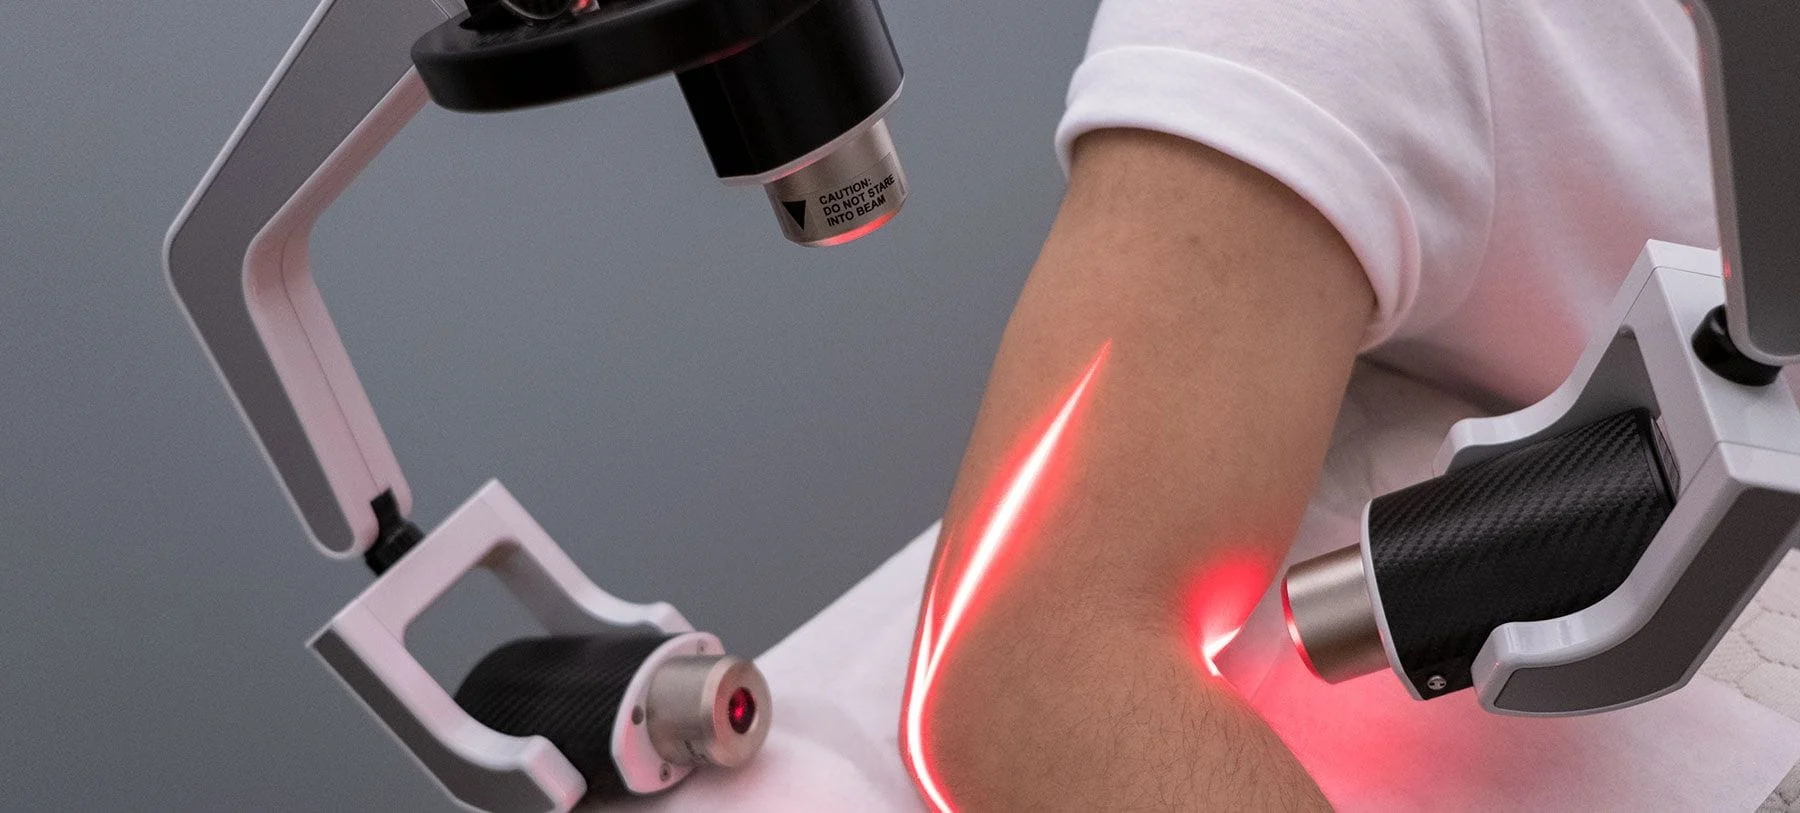 erchonia fx635 cold laser therapy is FDA approved for treating pain